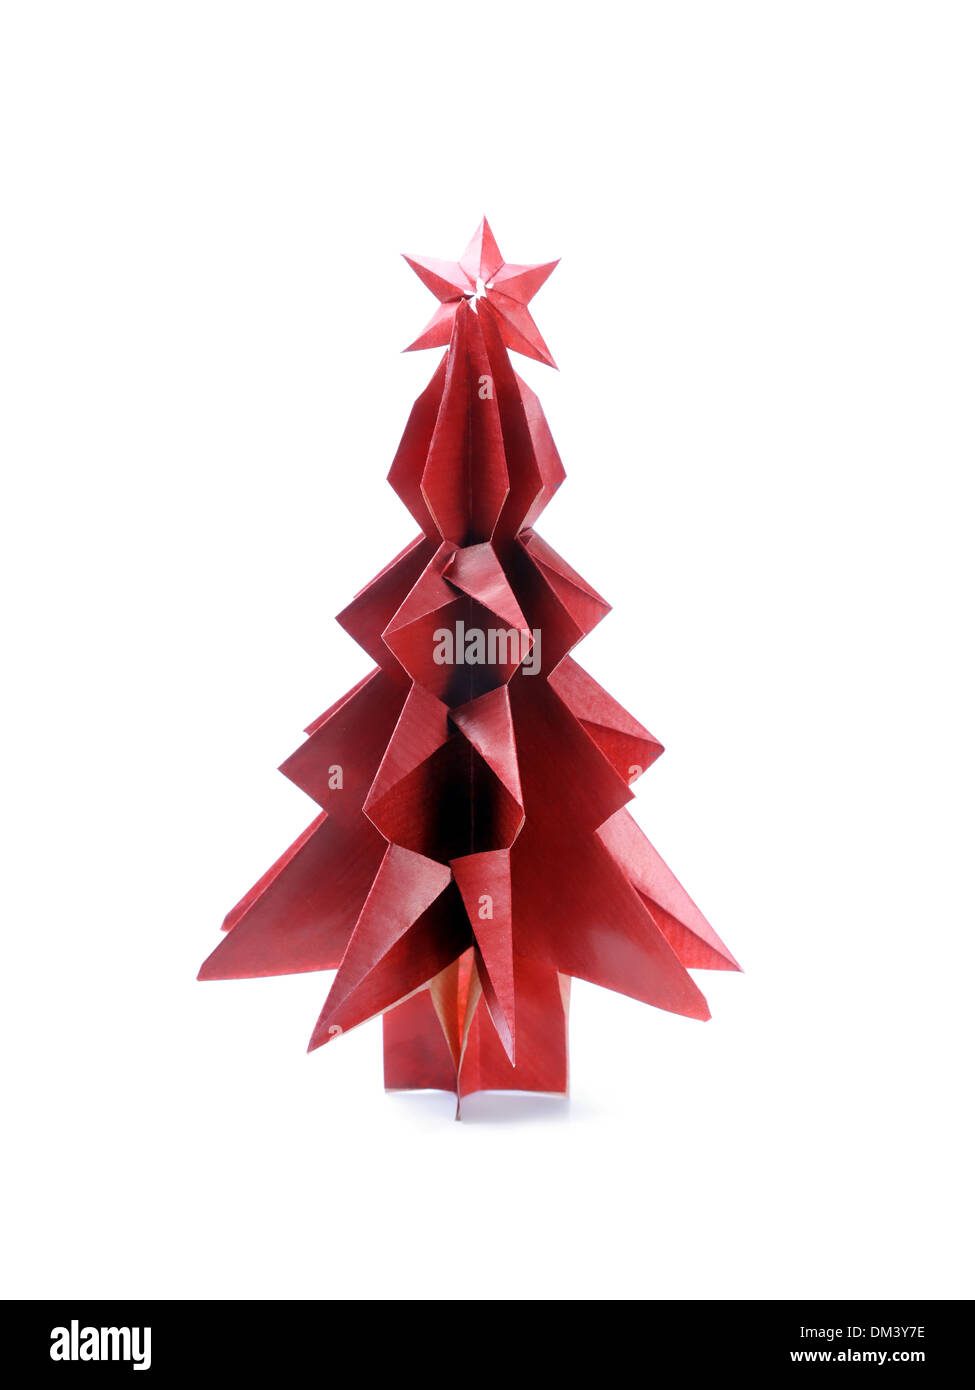 Origami christmas tree made from red paper shot over white background Stock Photo